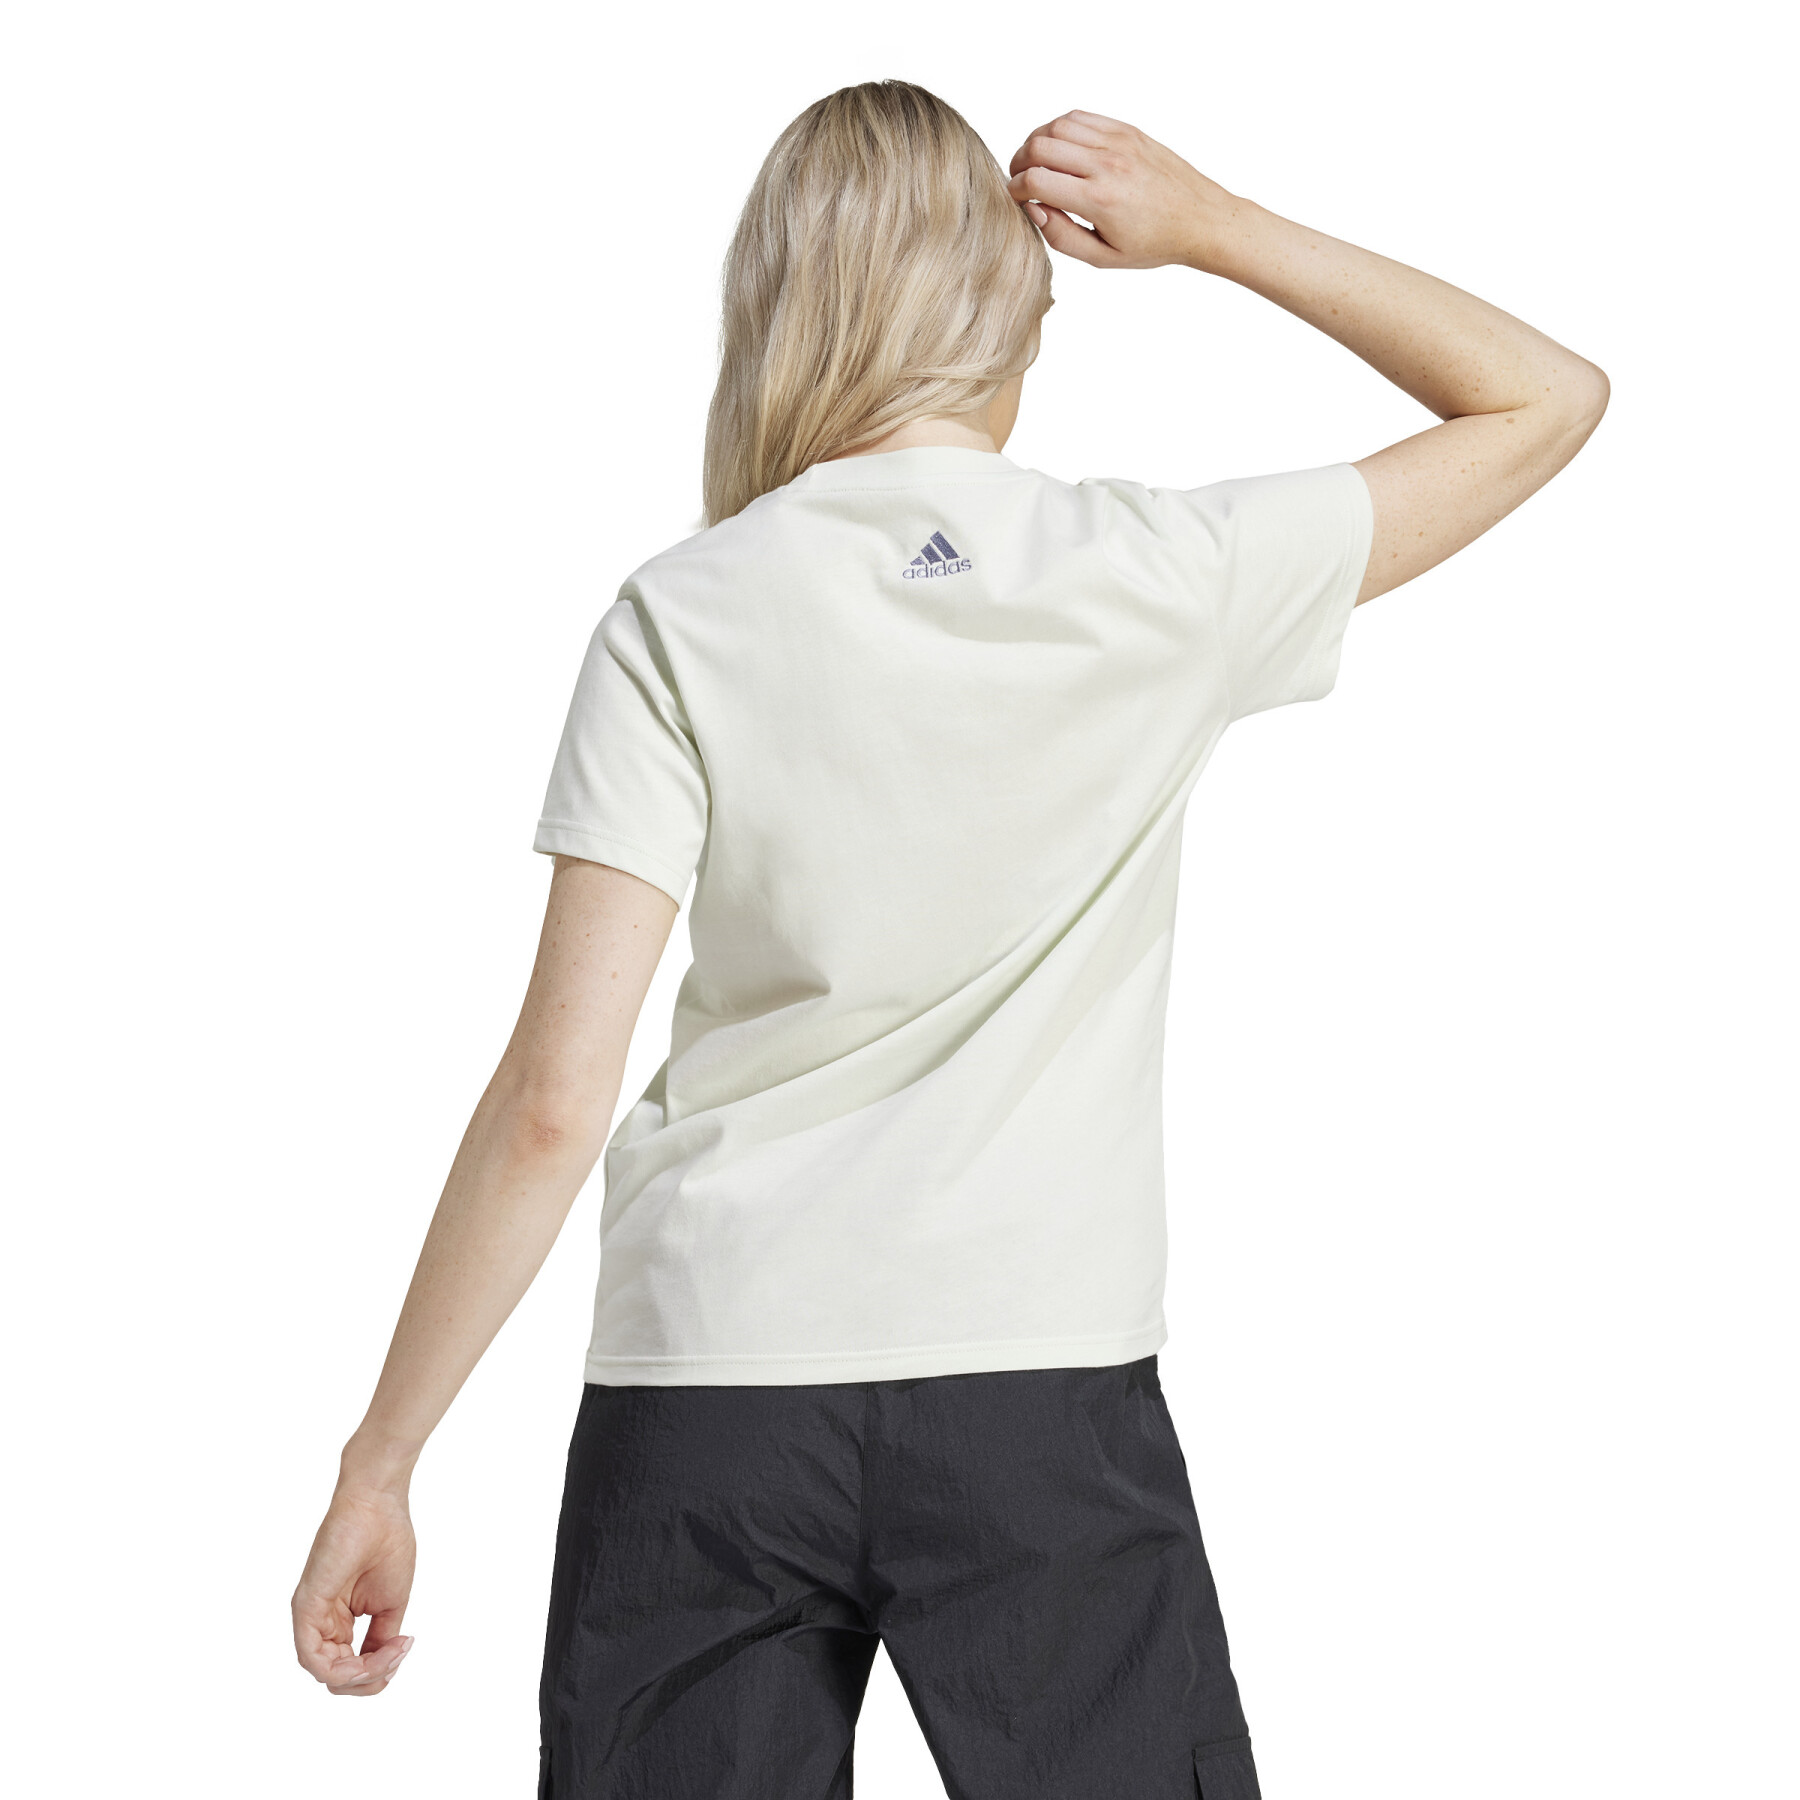 T-Shirt adidas The Soft Side Linear